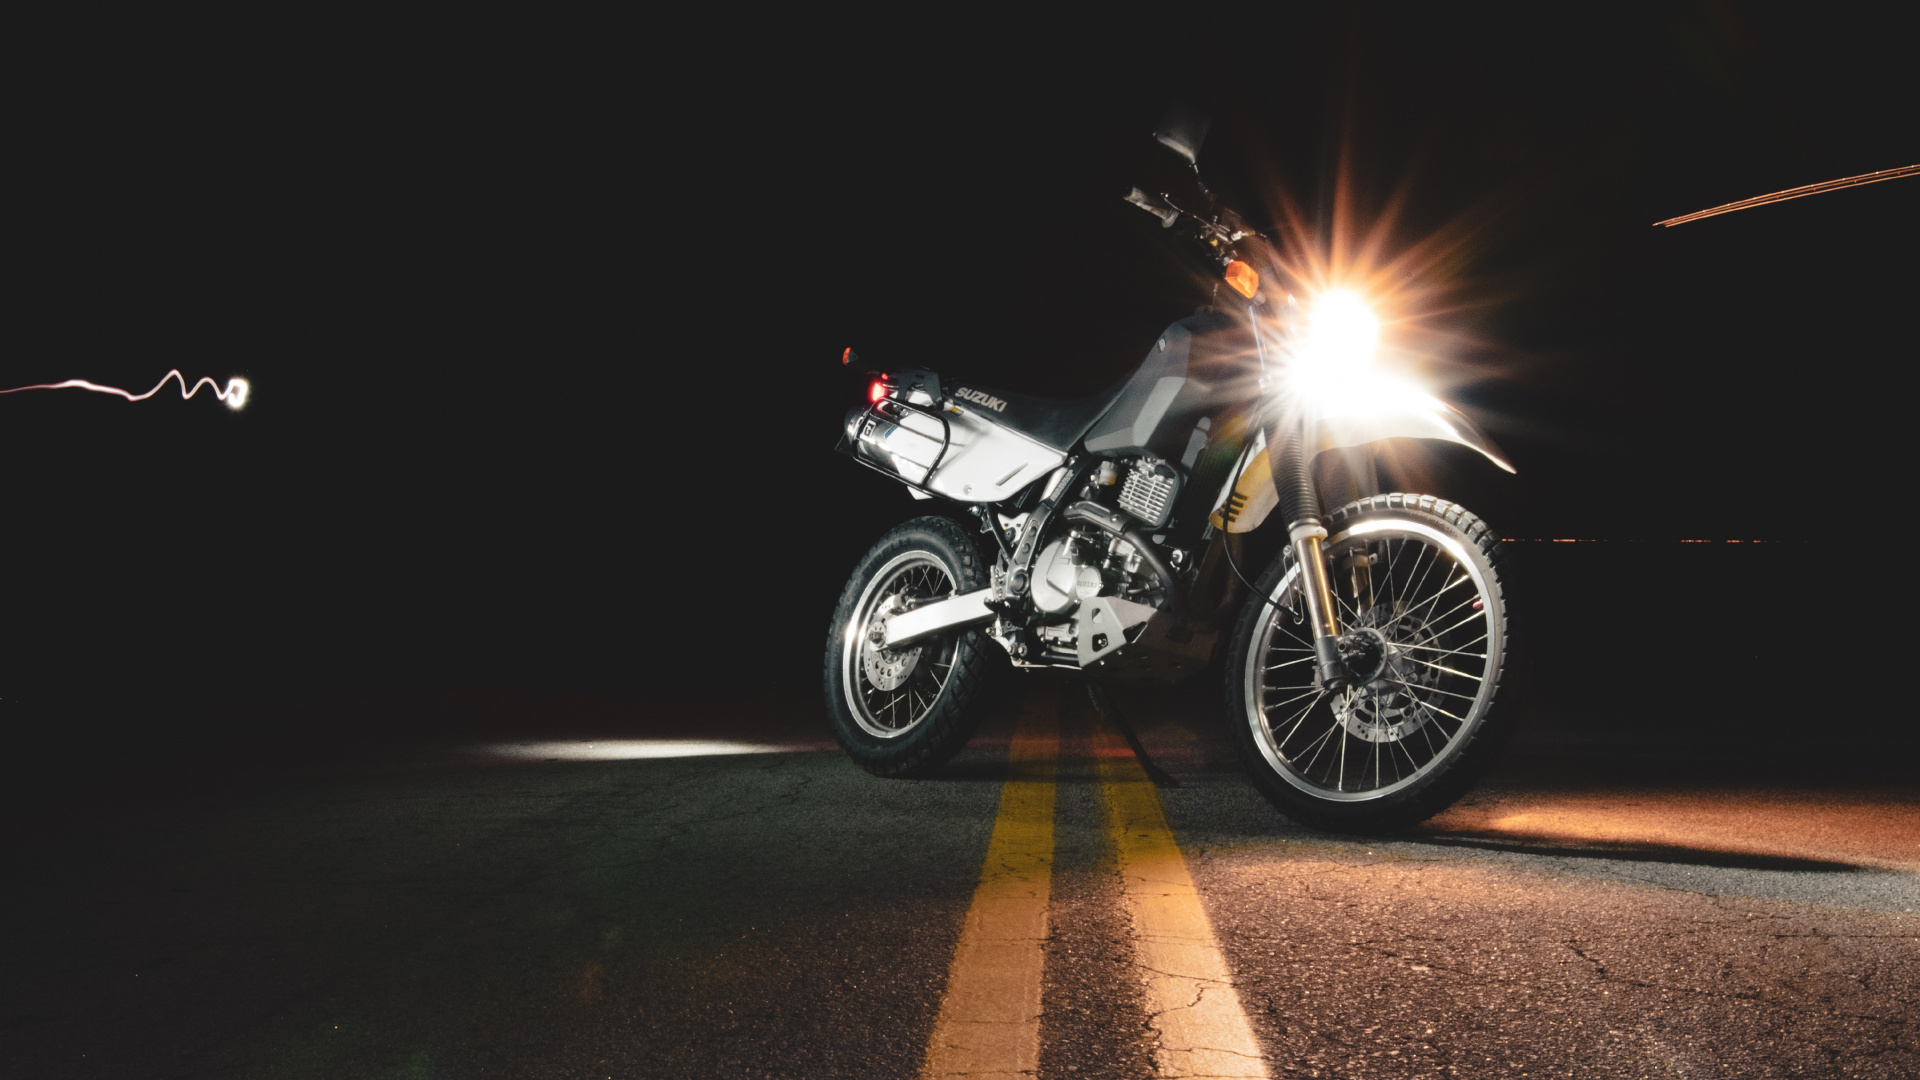 Black and Silver Motorcycle on Road During Night Time. Wallpaper in 1920x1080 Resolution